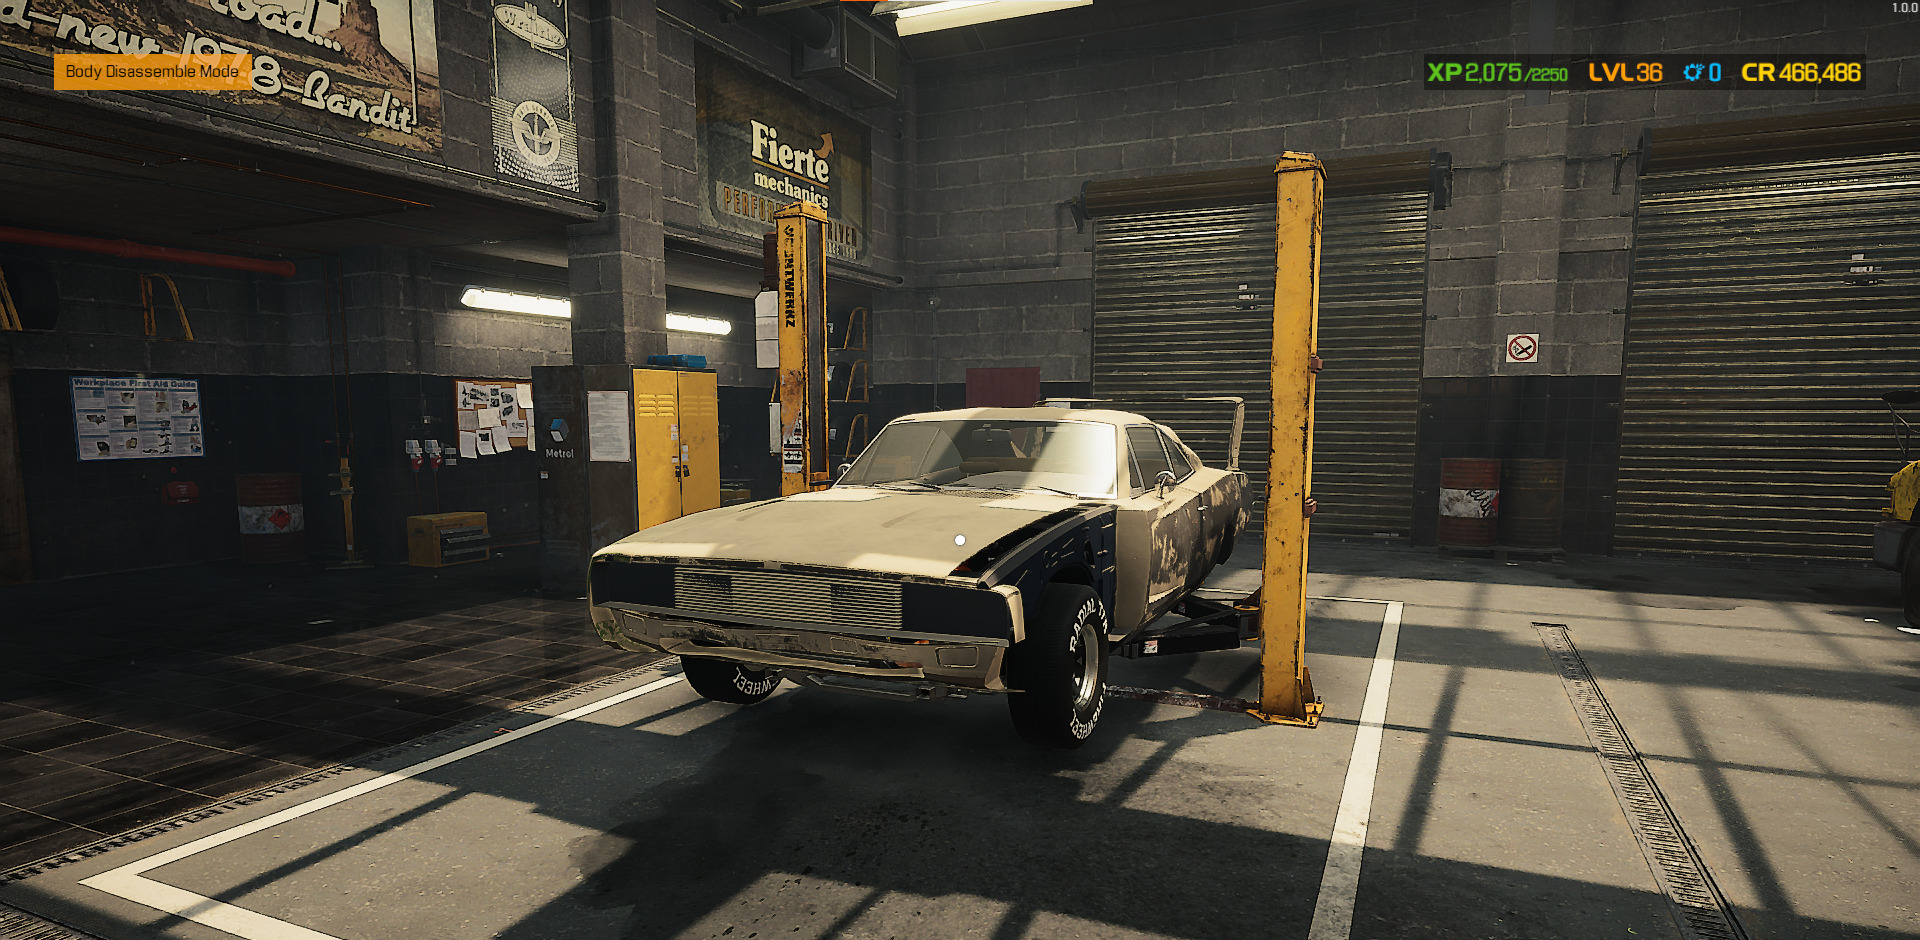 Drain the old oil before you change oil in Car Mechanic Simulator. 